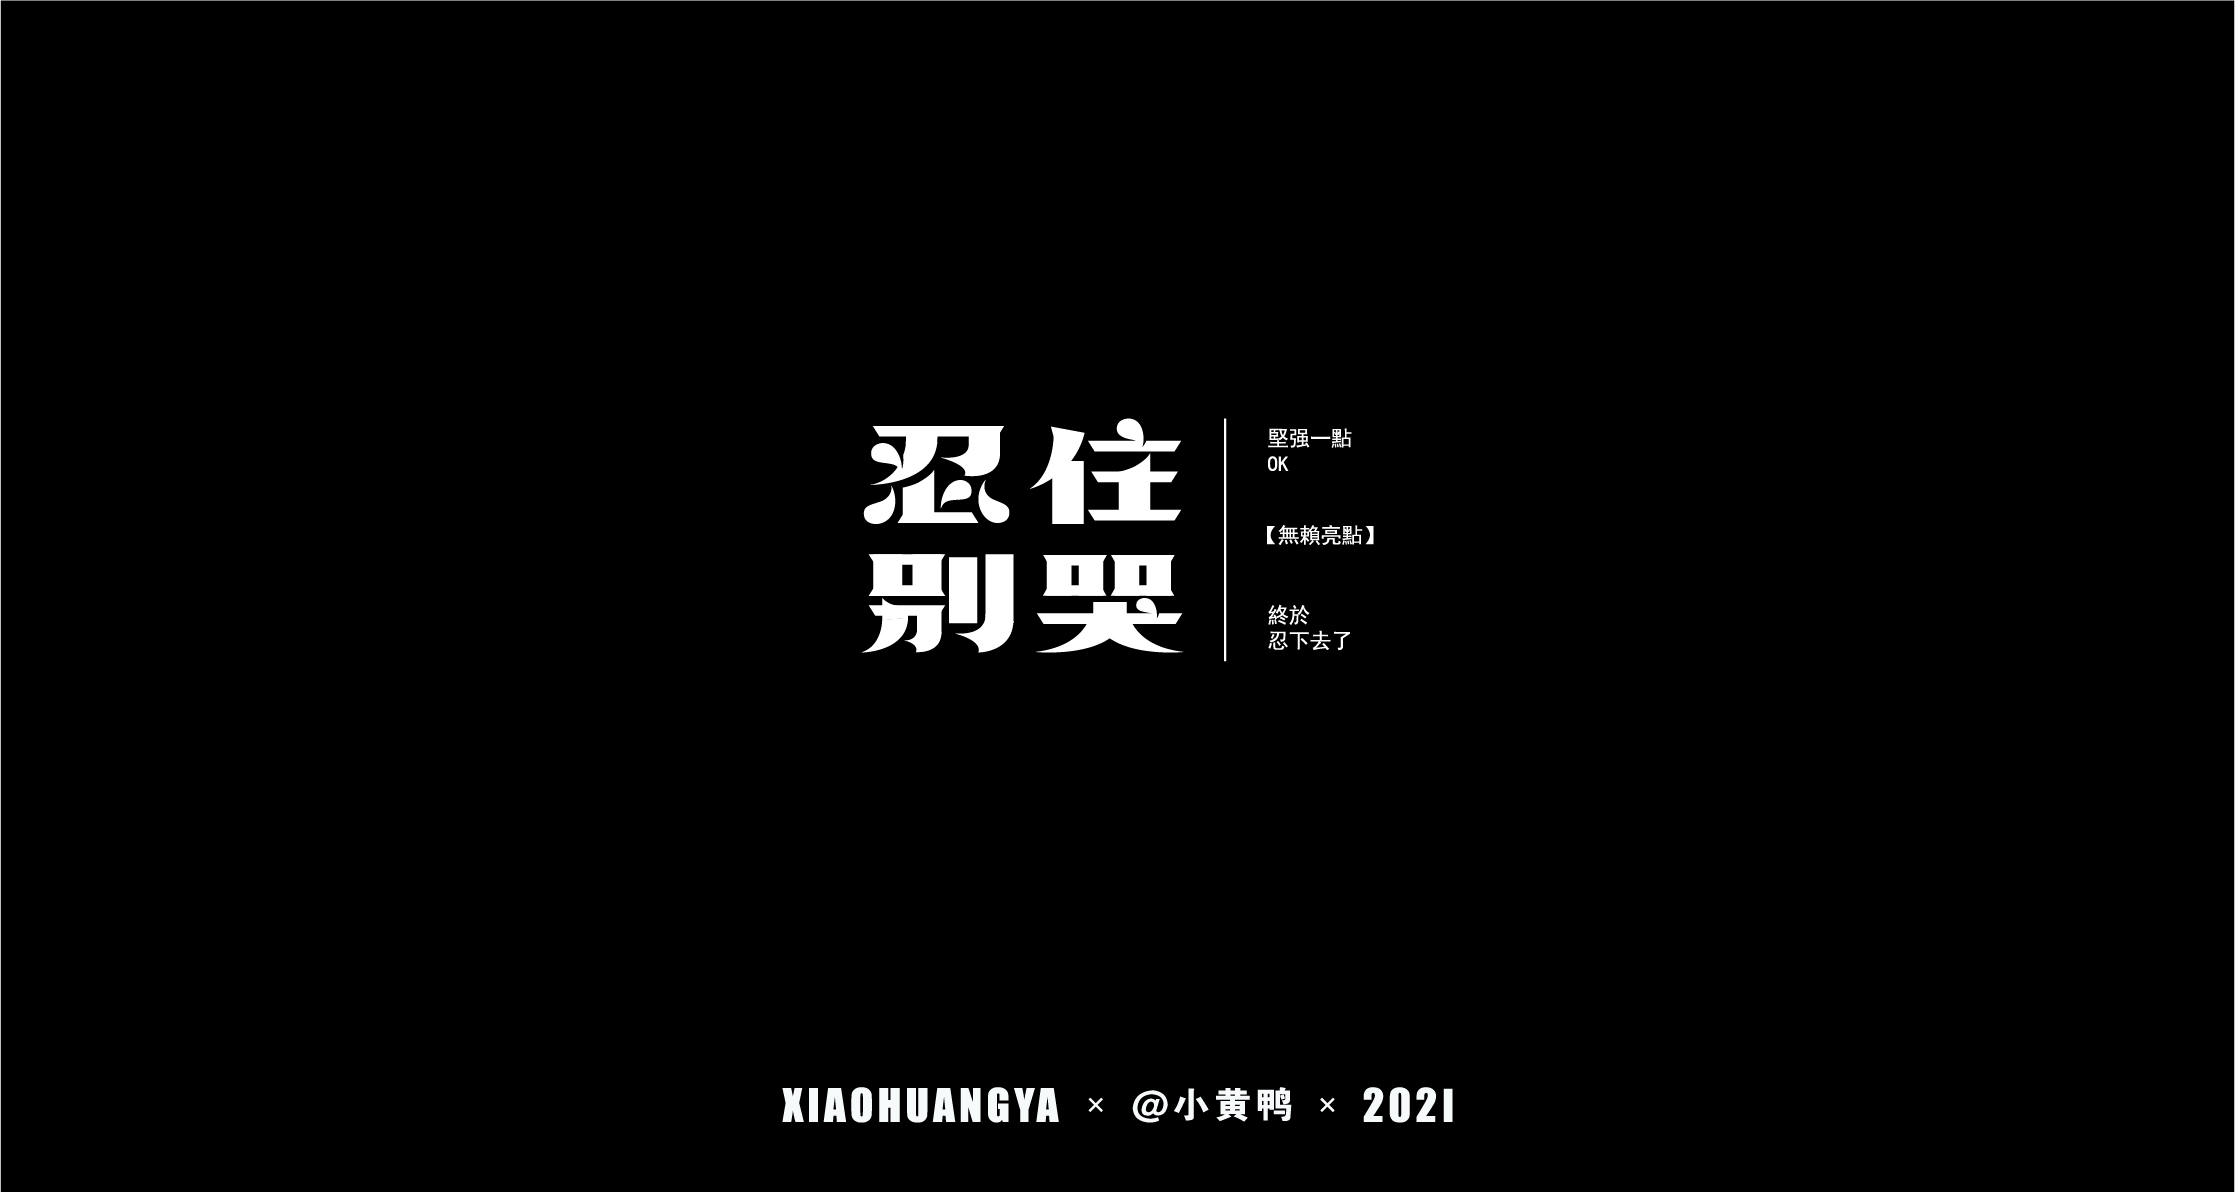 16P Collection of the latest Chinese font design schemes in 2021 #.101